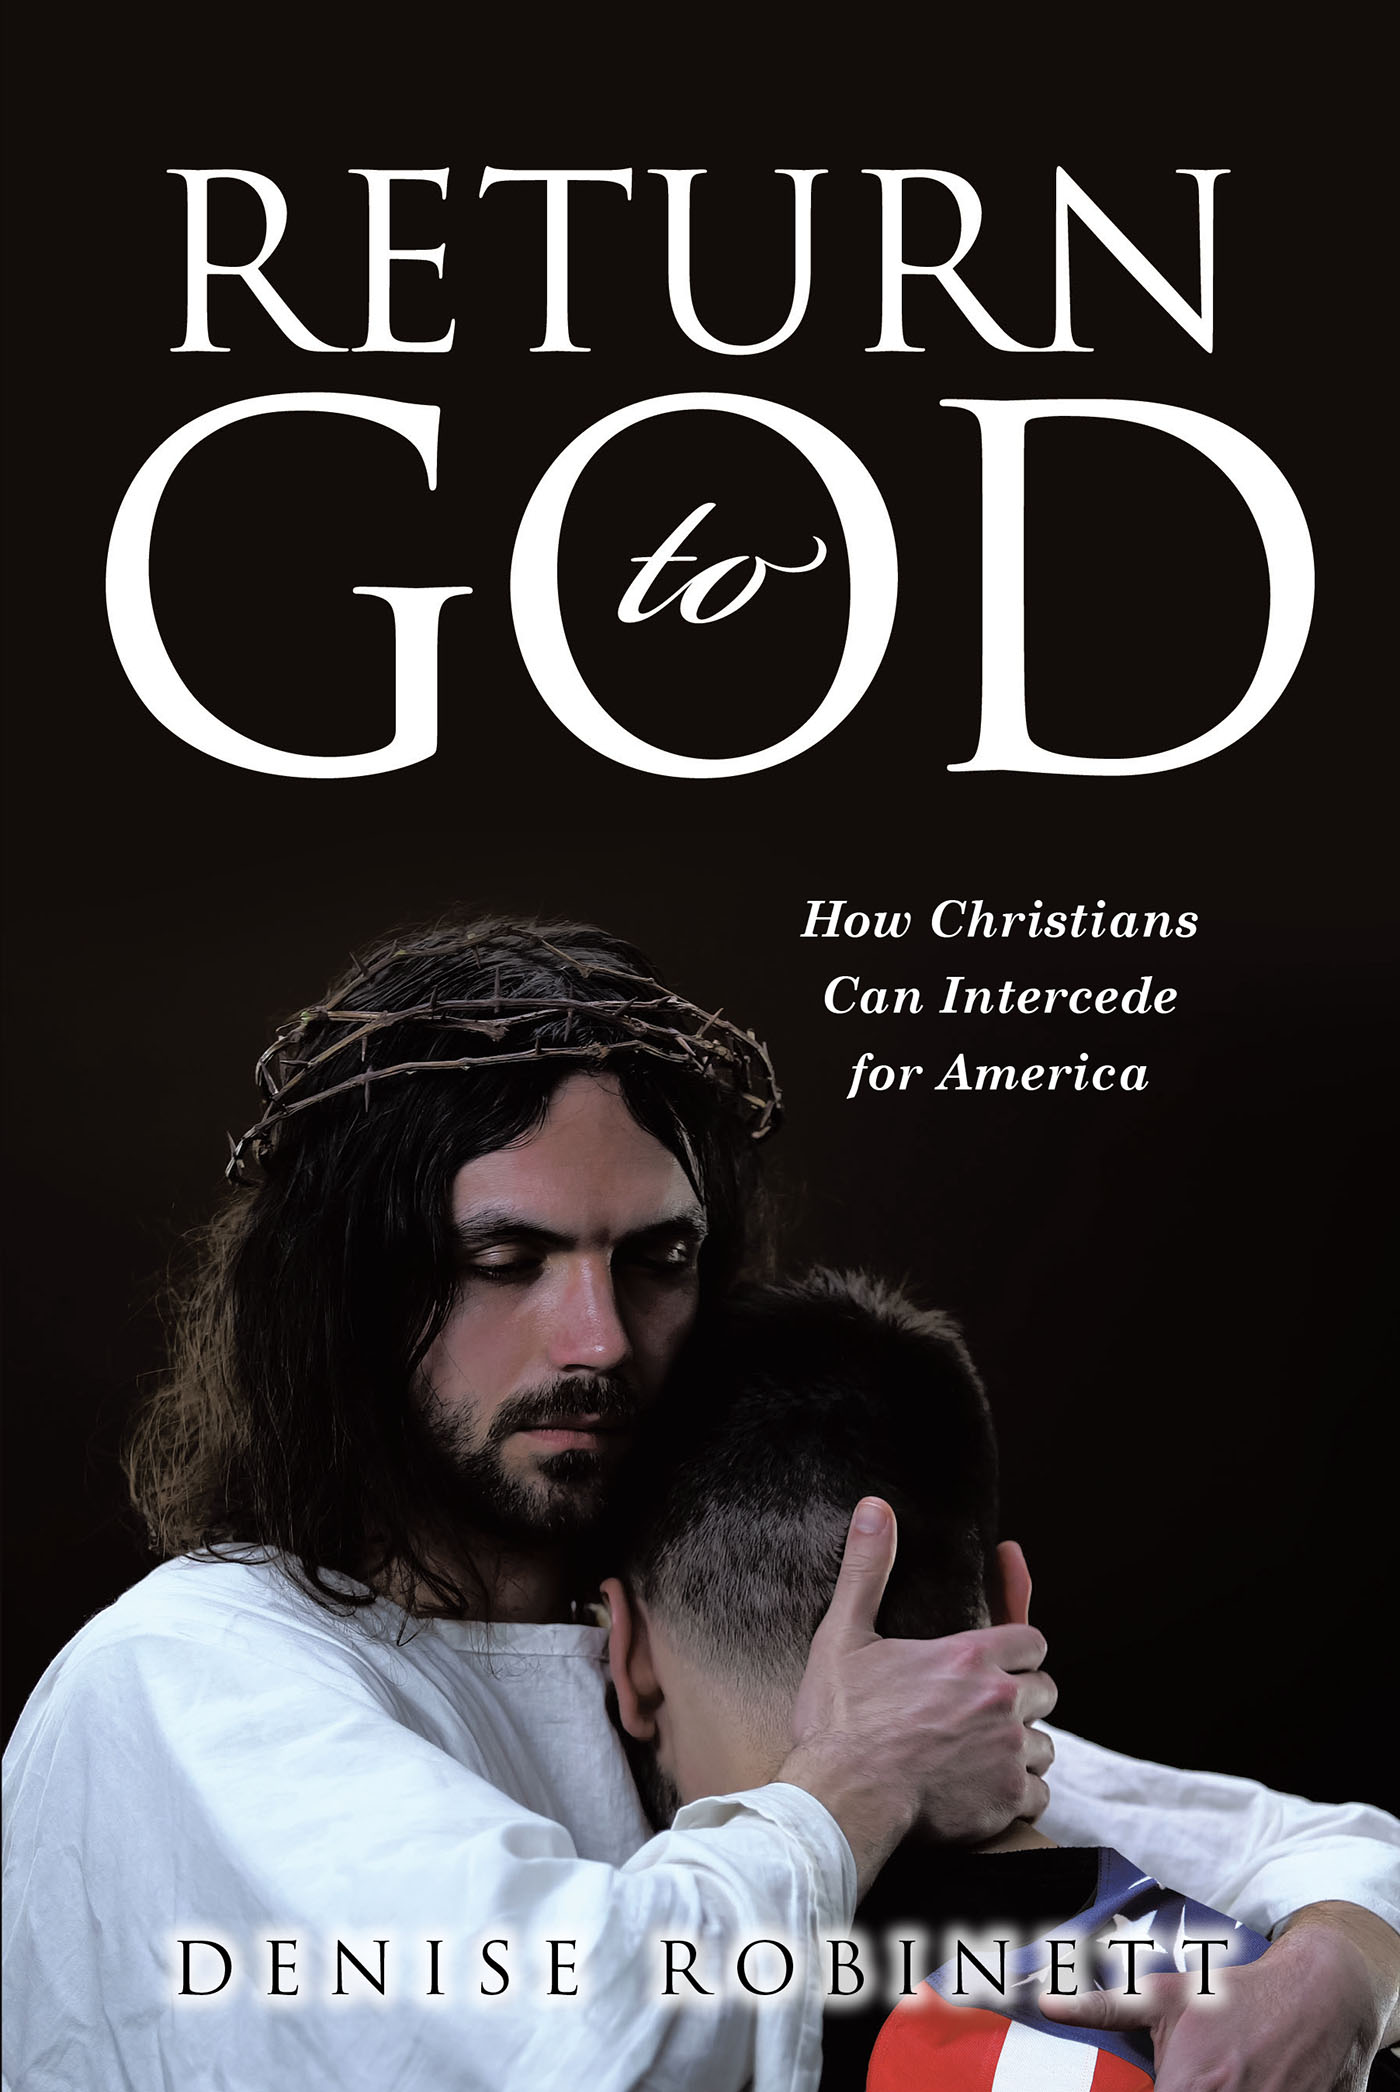 Author Denise Robinett’s New Book, "Return to God," Explores How Christians Can Petition God to Rescue America from a Devastating Collision Course with Sin